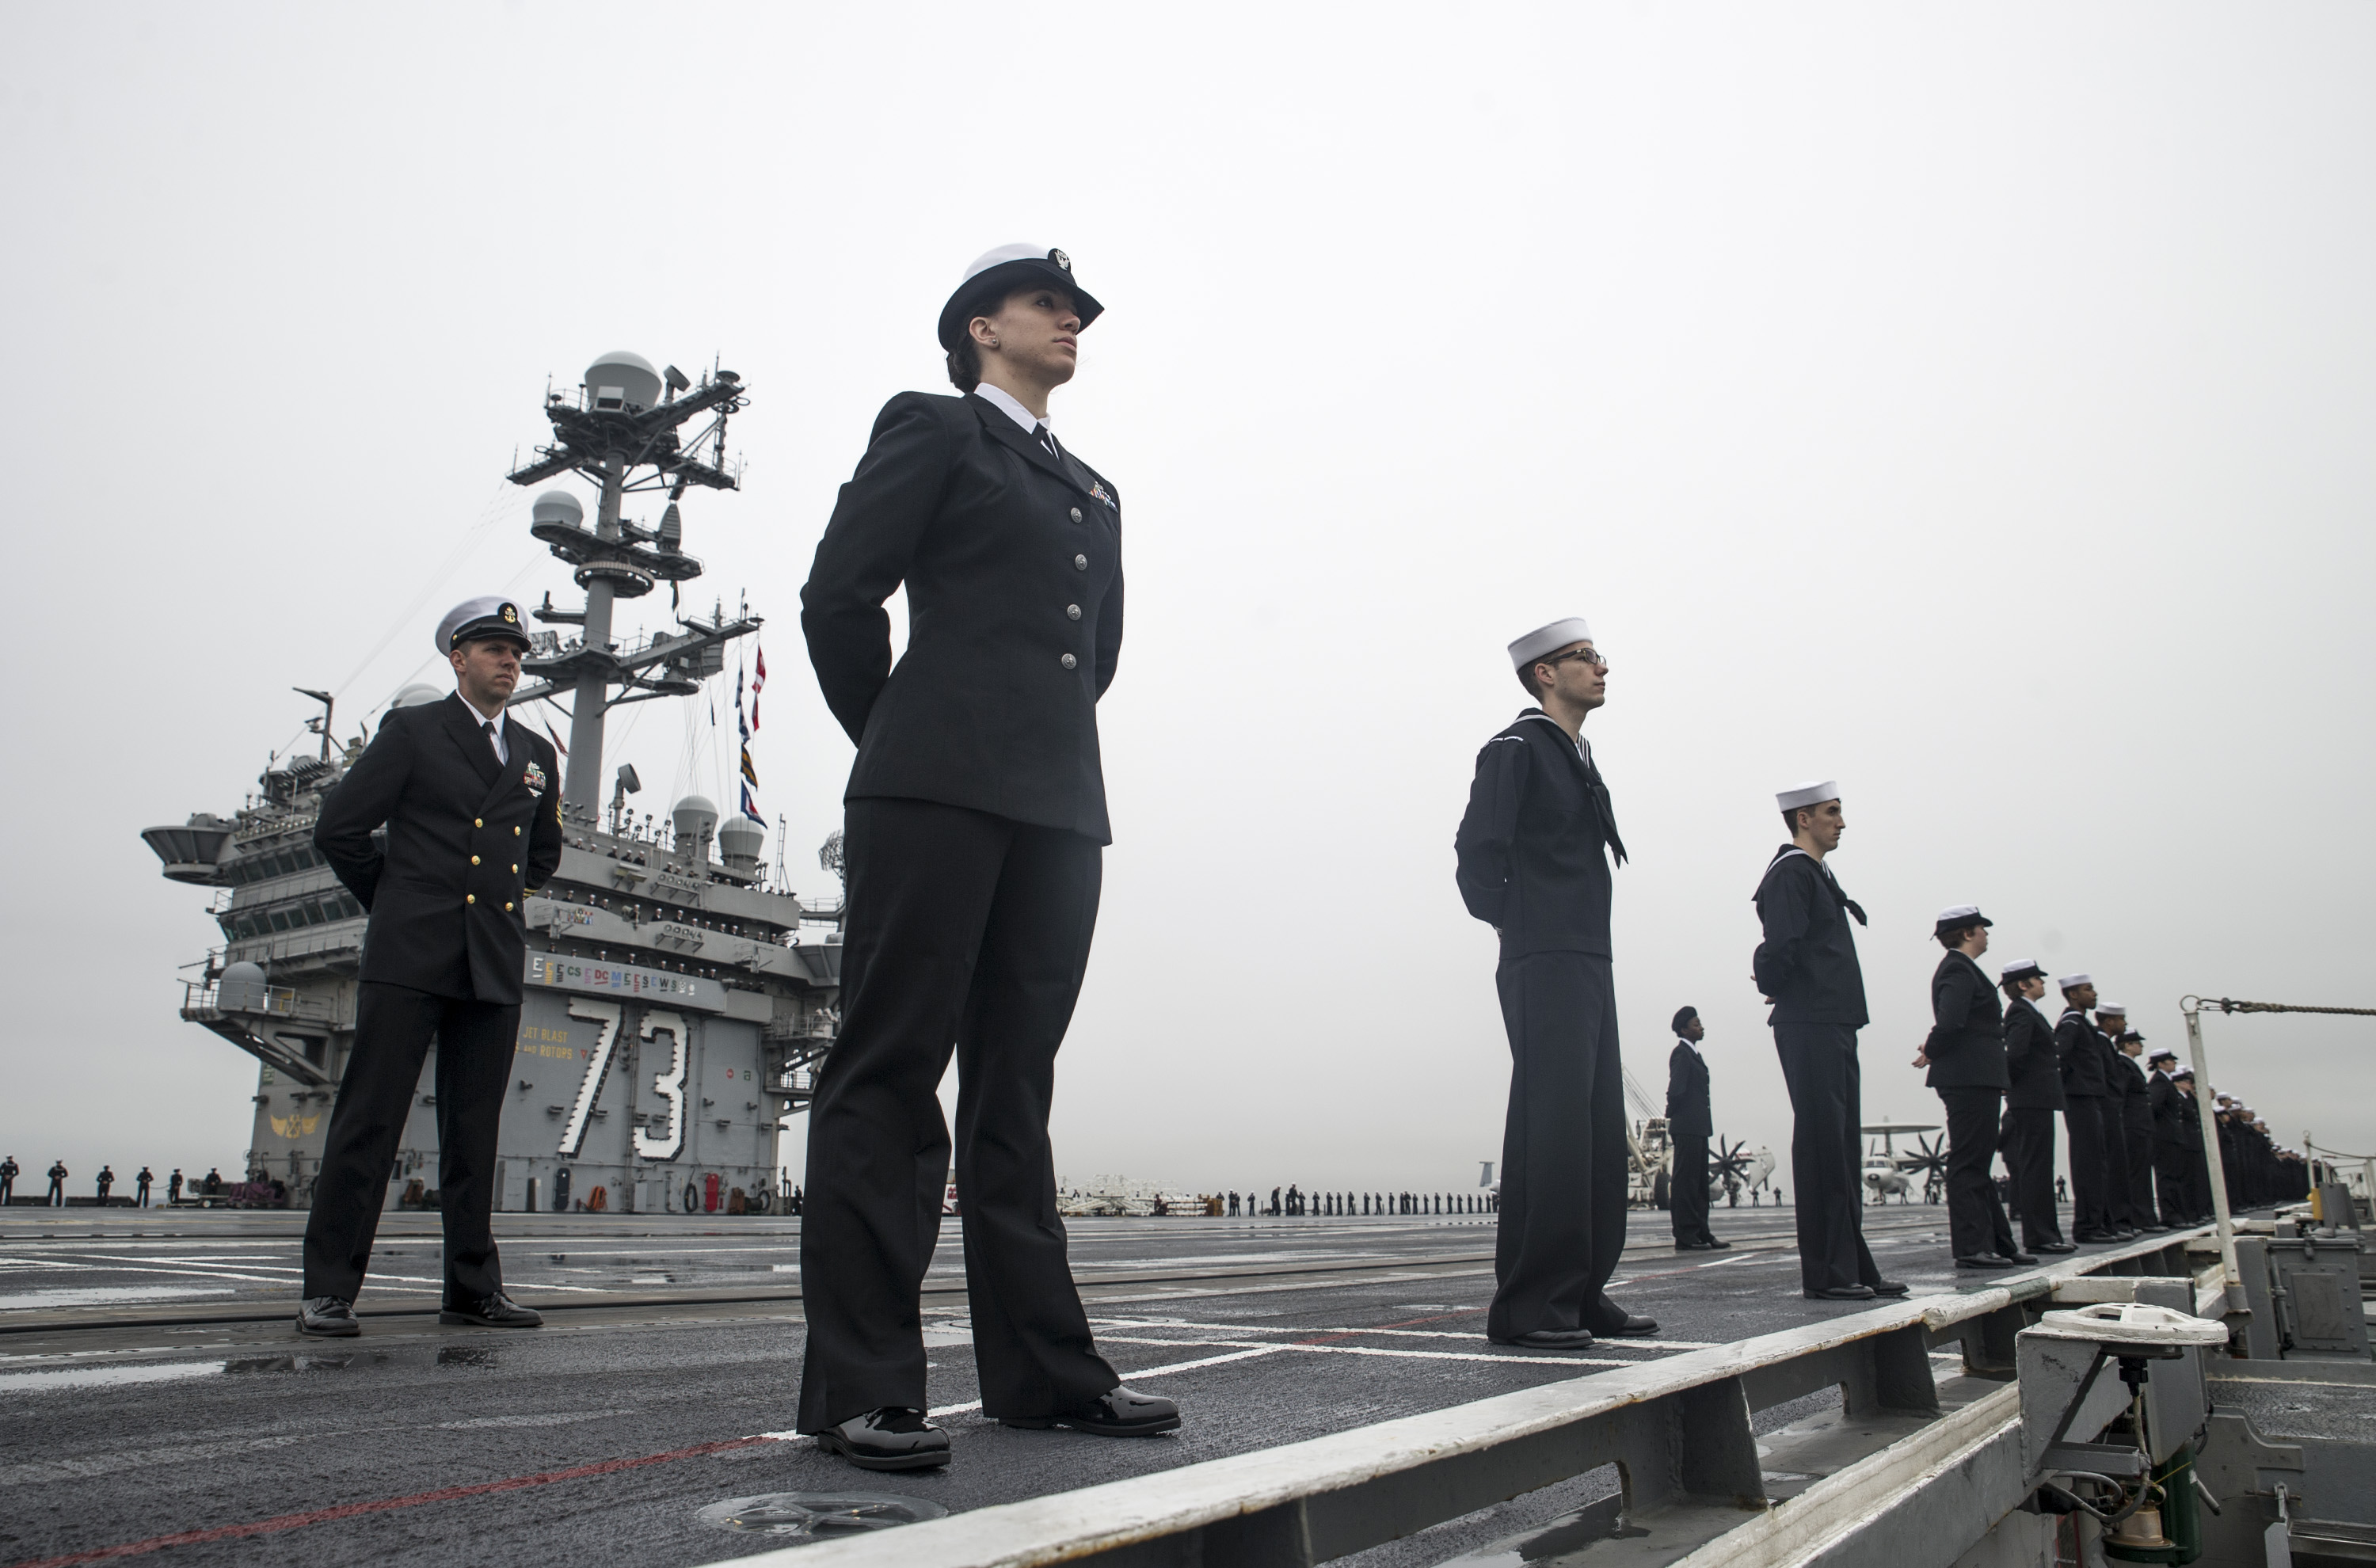  Sailors man the rails on the flight deck of aircraft carrier USS George Washington (CVN-73) as the ship arrives in its new homeport of Naval Station Norfolk, Va. in December, 2015. US Navy Photo